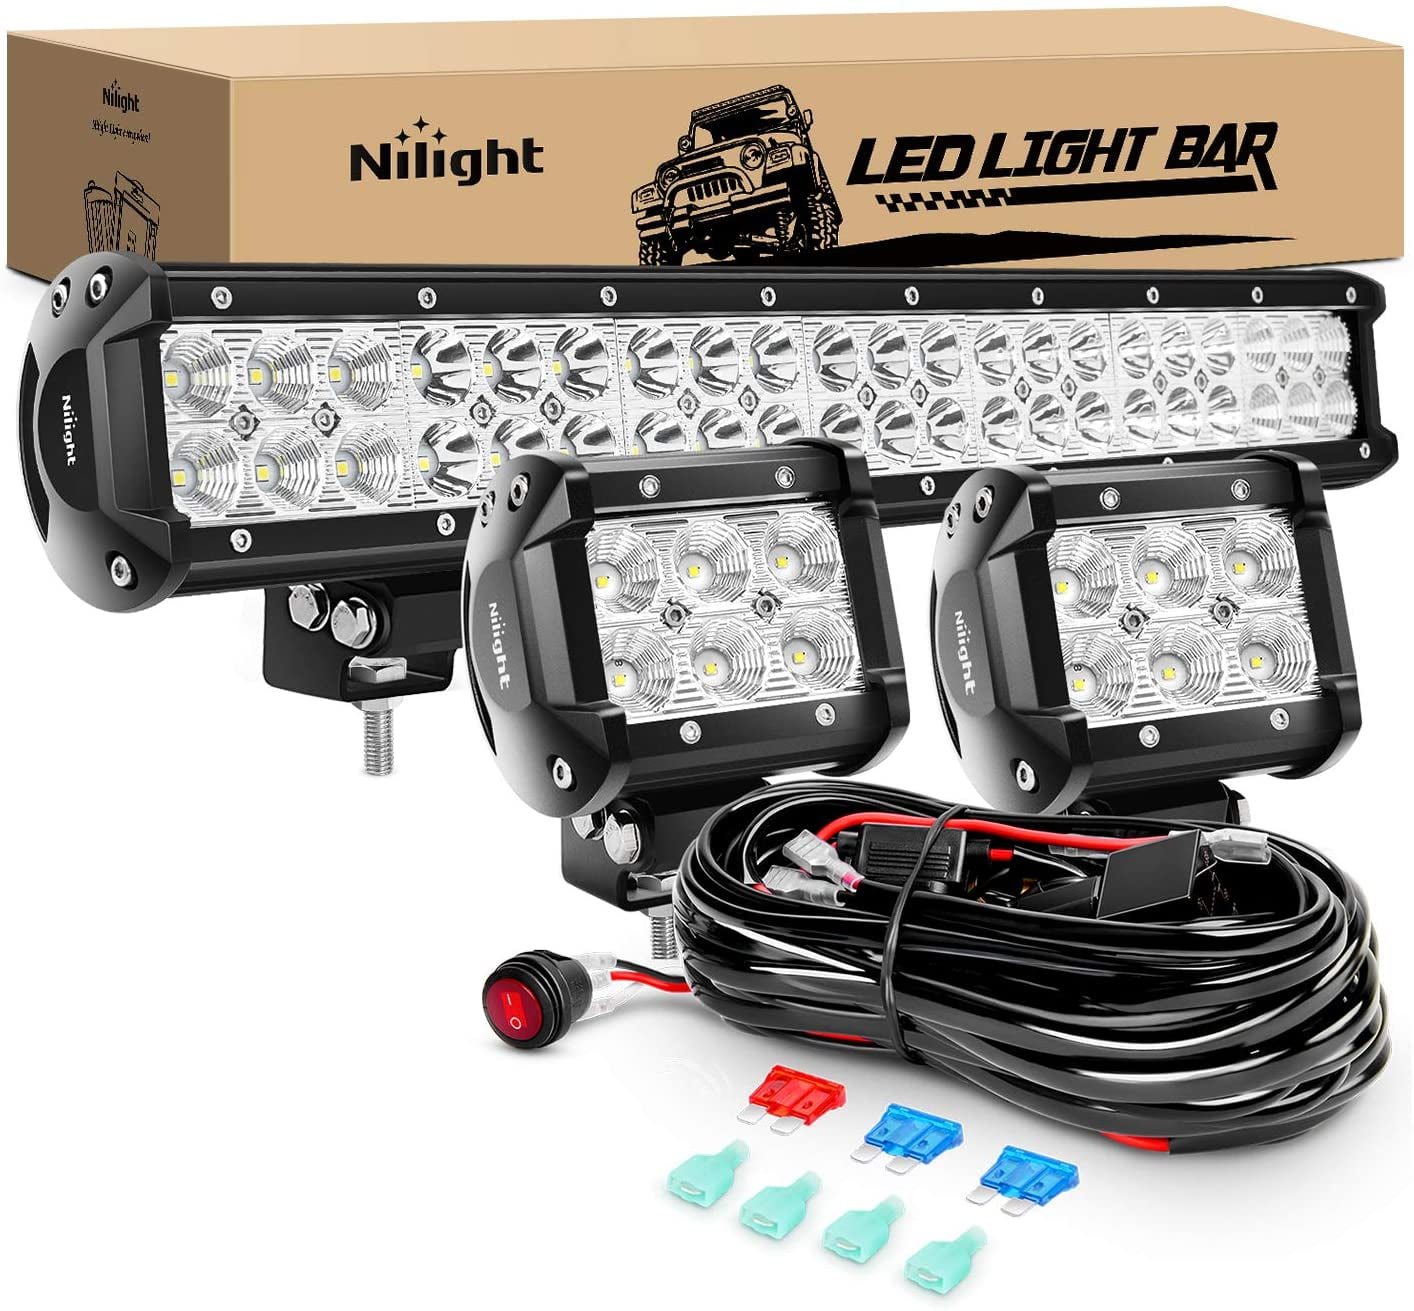 Nilight 20Inch 126W Spot Flood Combo Led Light Bar 4PCS 4Inch 18W Spot LED Pods Fog Lights for Jeep Wrangler Boat Truck Tractor Trailer Off-Road,2 years Warranty 